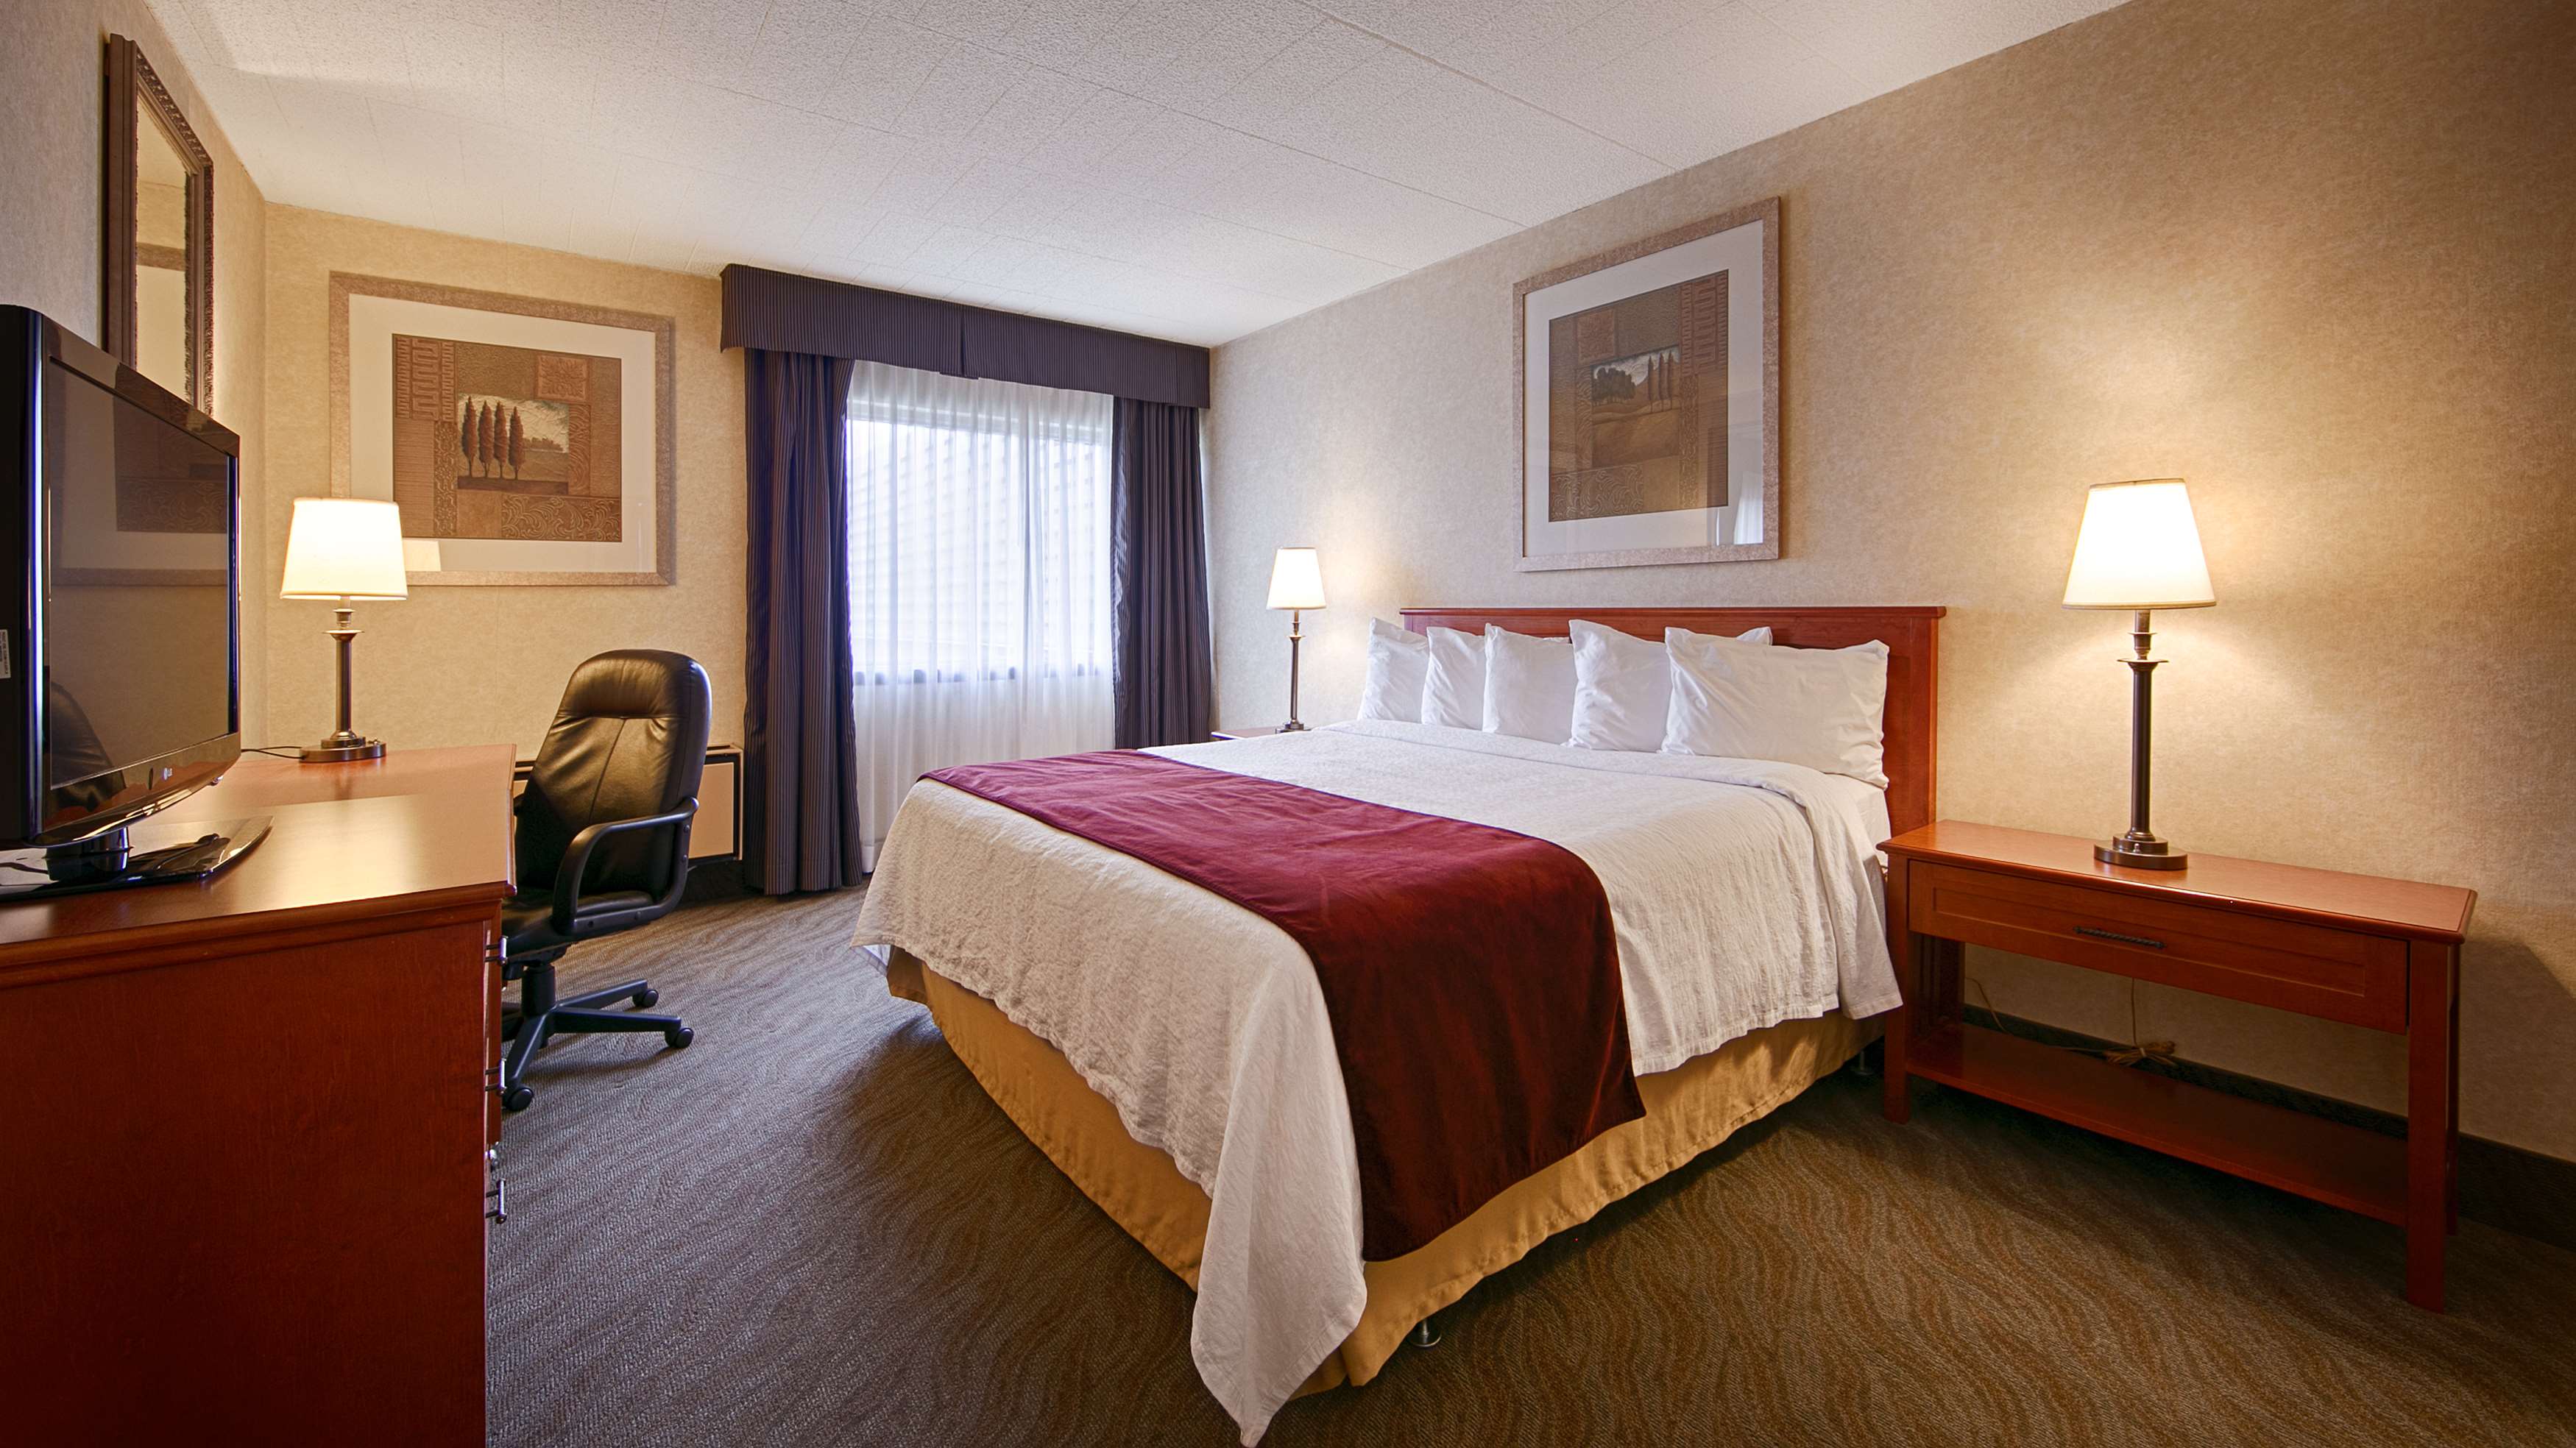 King Guest Suite Best Western North Bay Hotel & Conference Centre North Bay (705)474-5800